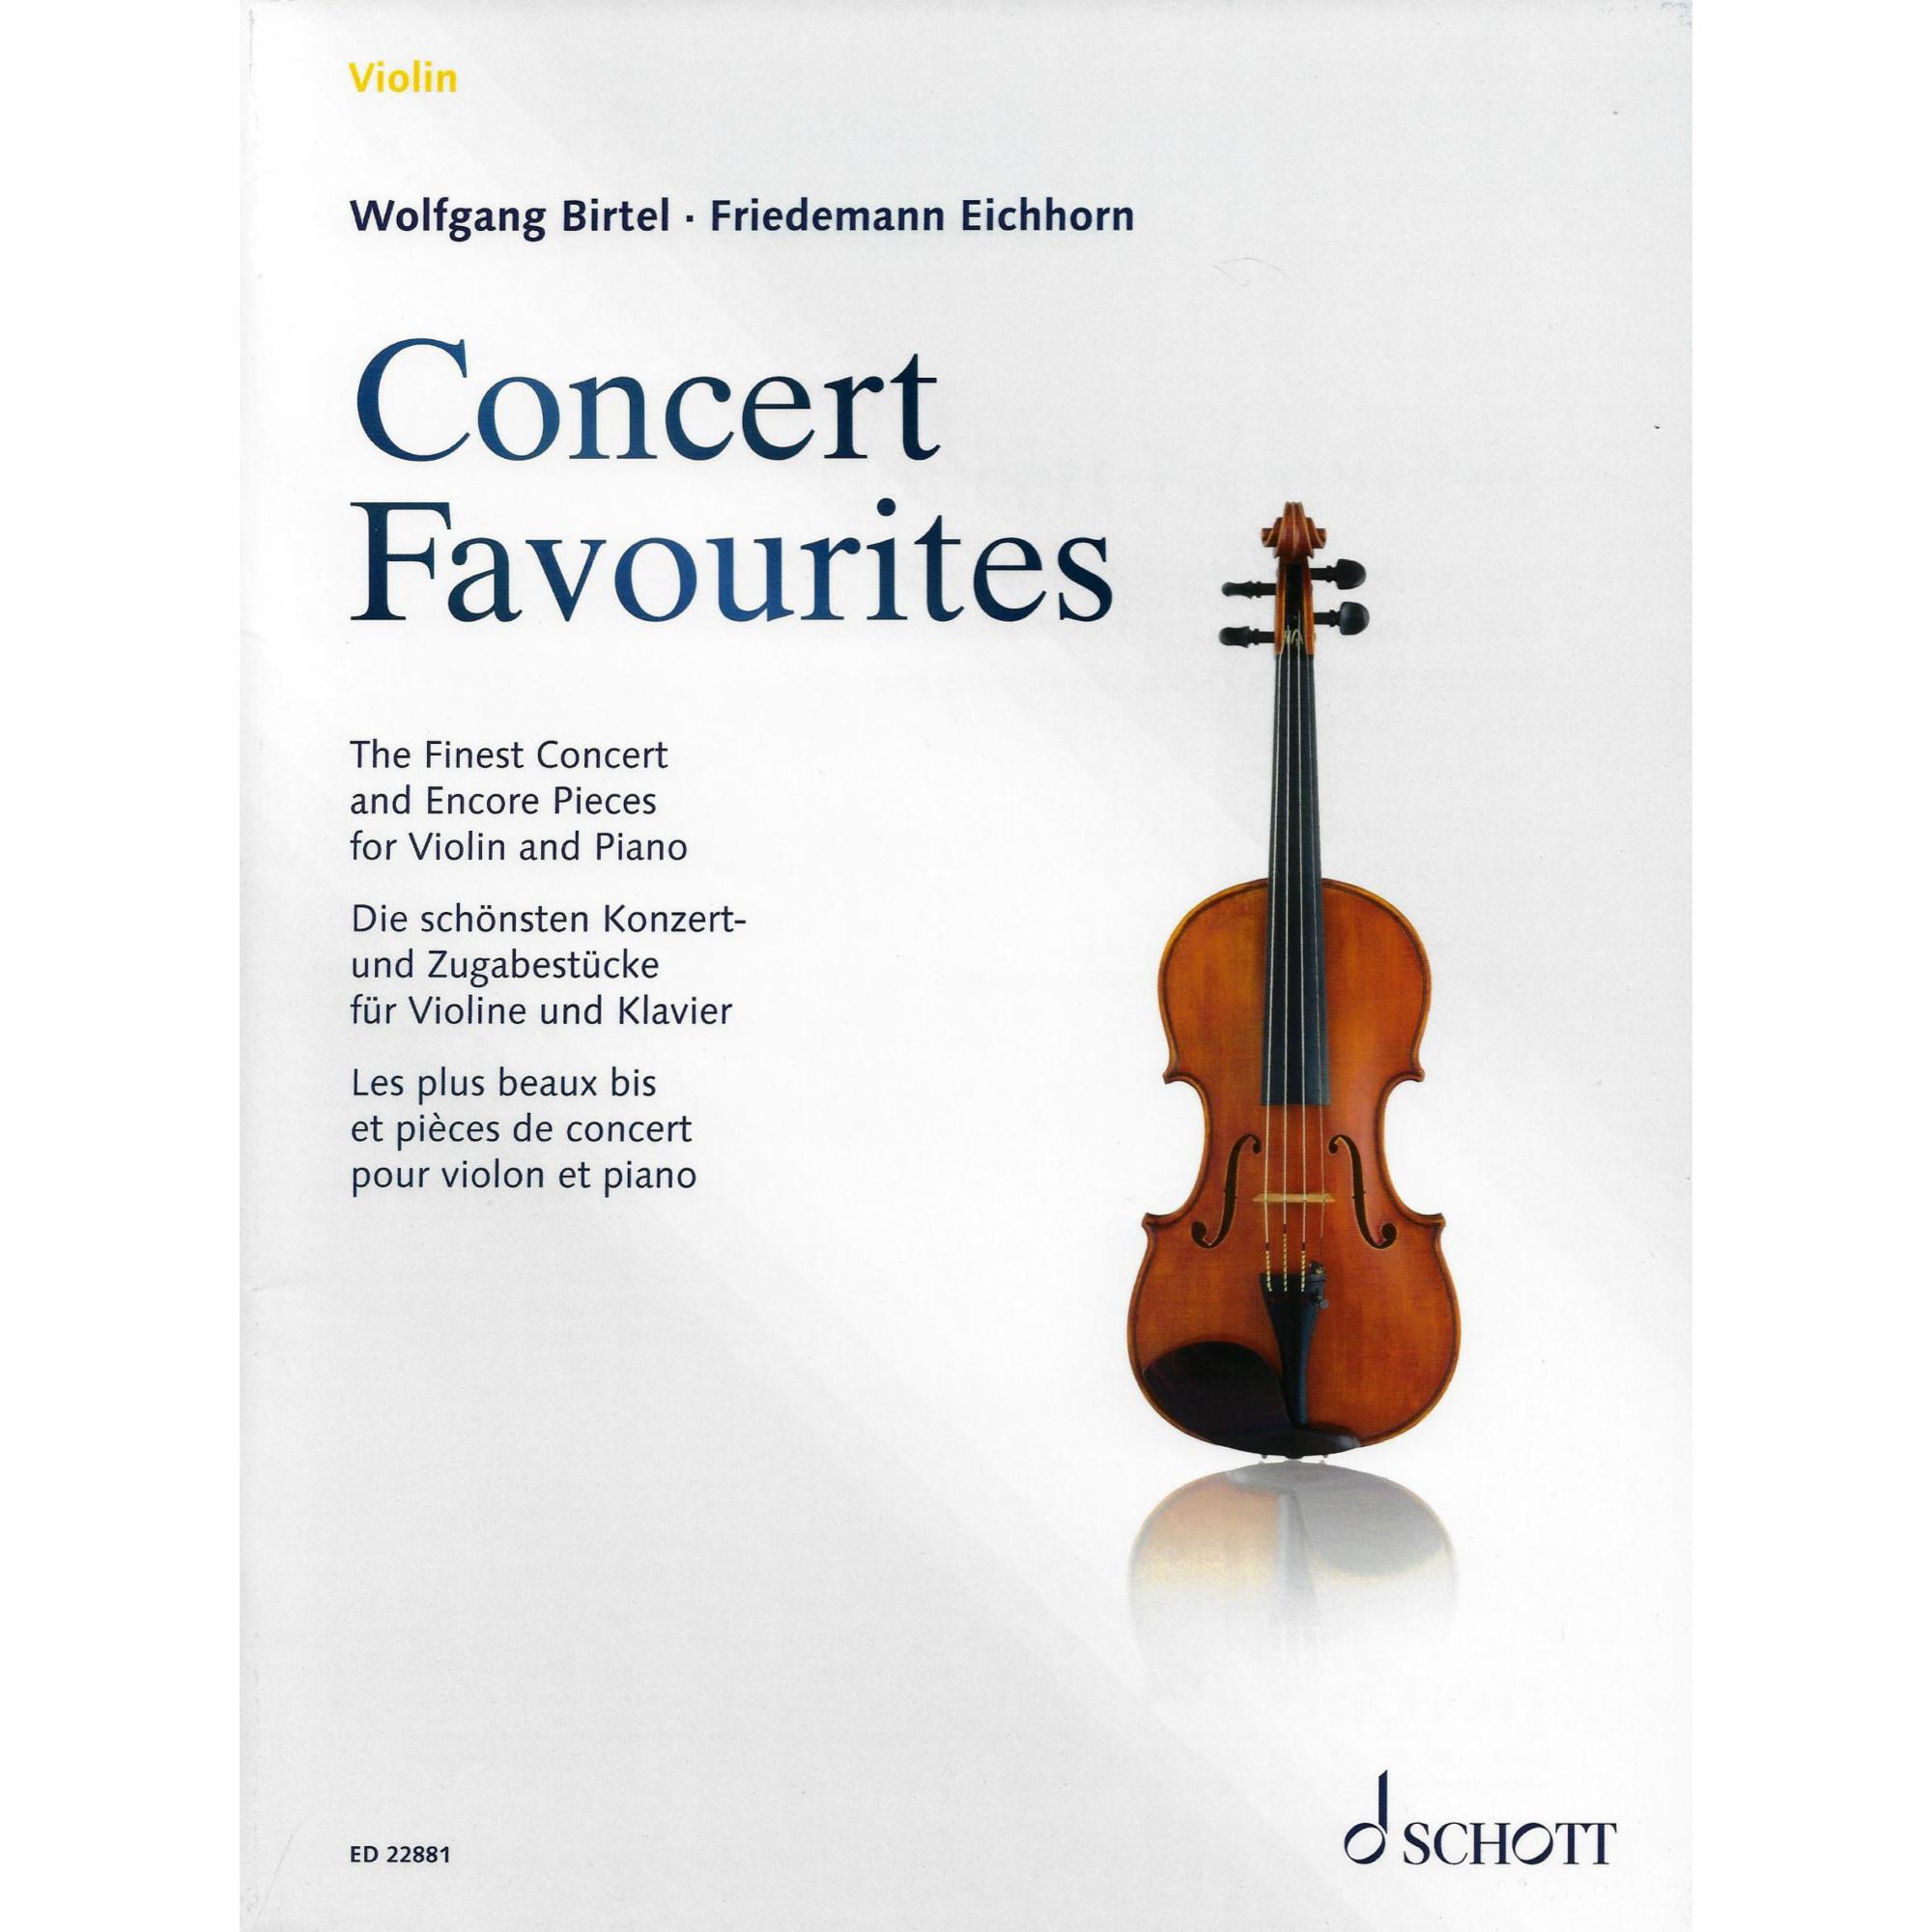 Concert Favorites for Violin and Piano